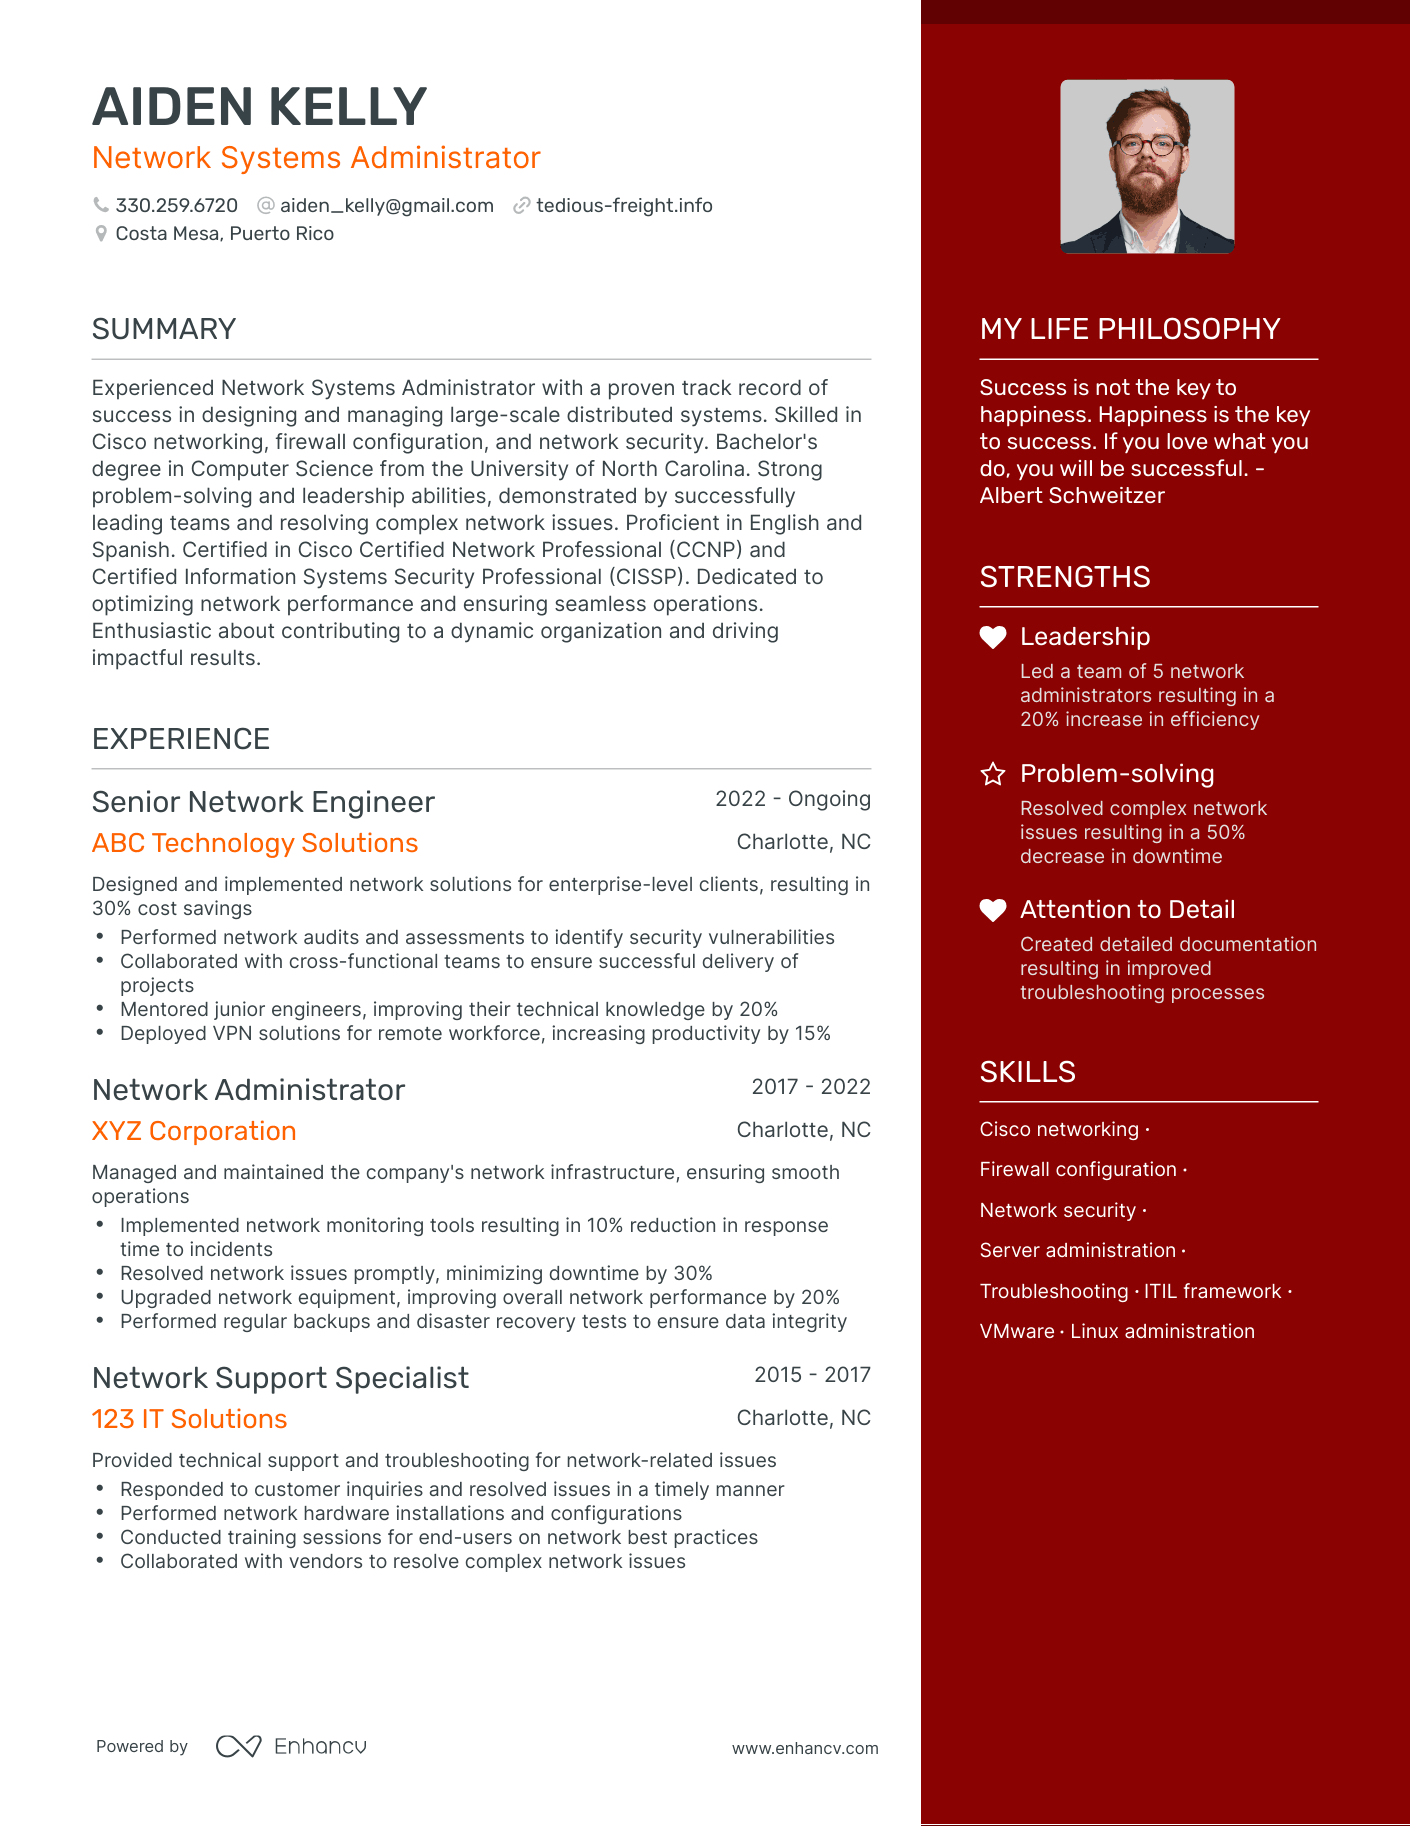 Network Systems Administrator resume example